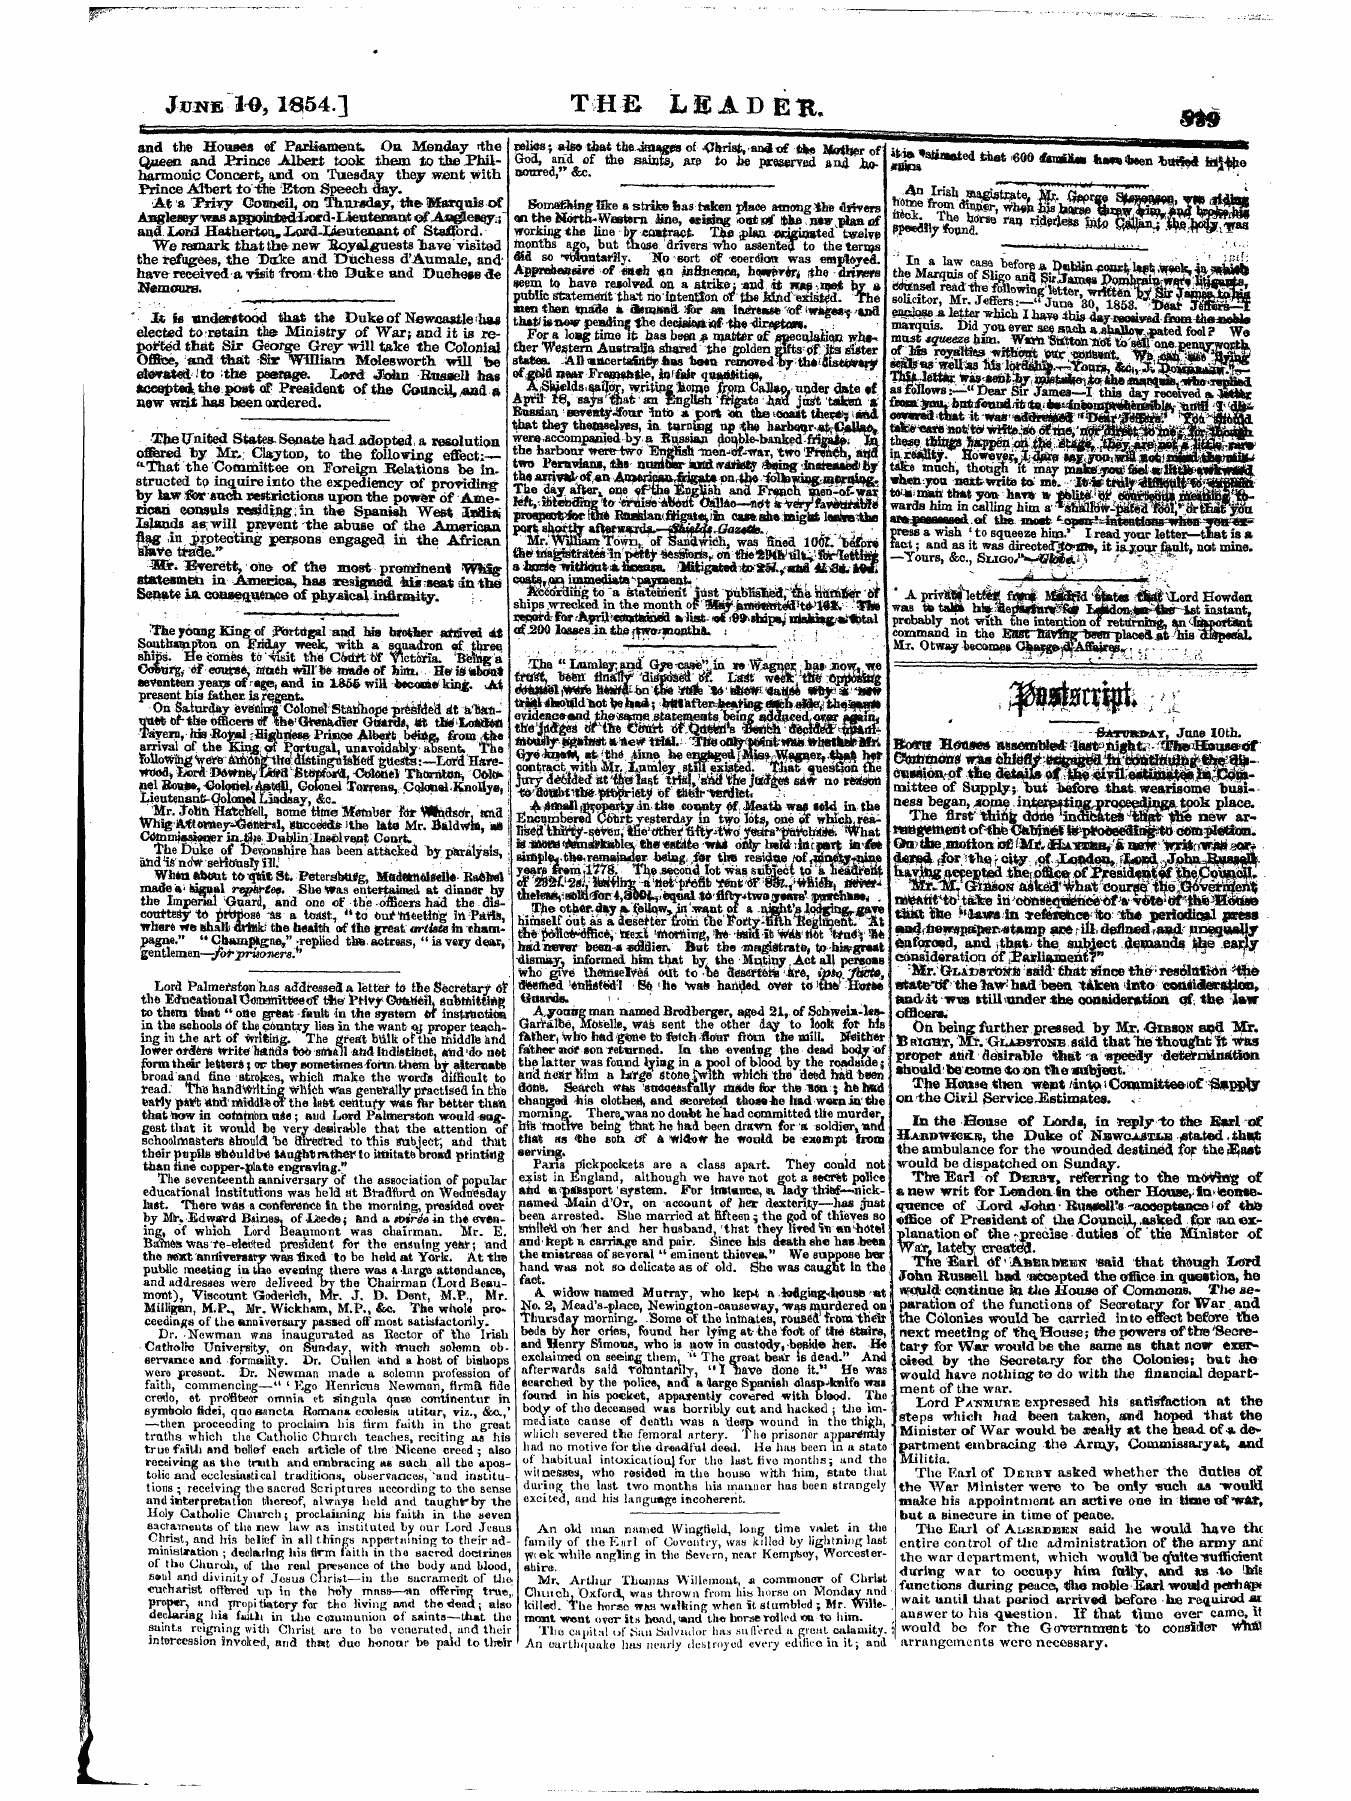 Leader (1850-1860): jS F Y, 1st edition - ' Tfrpw* - '.Cjune